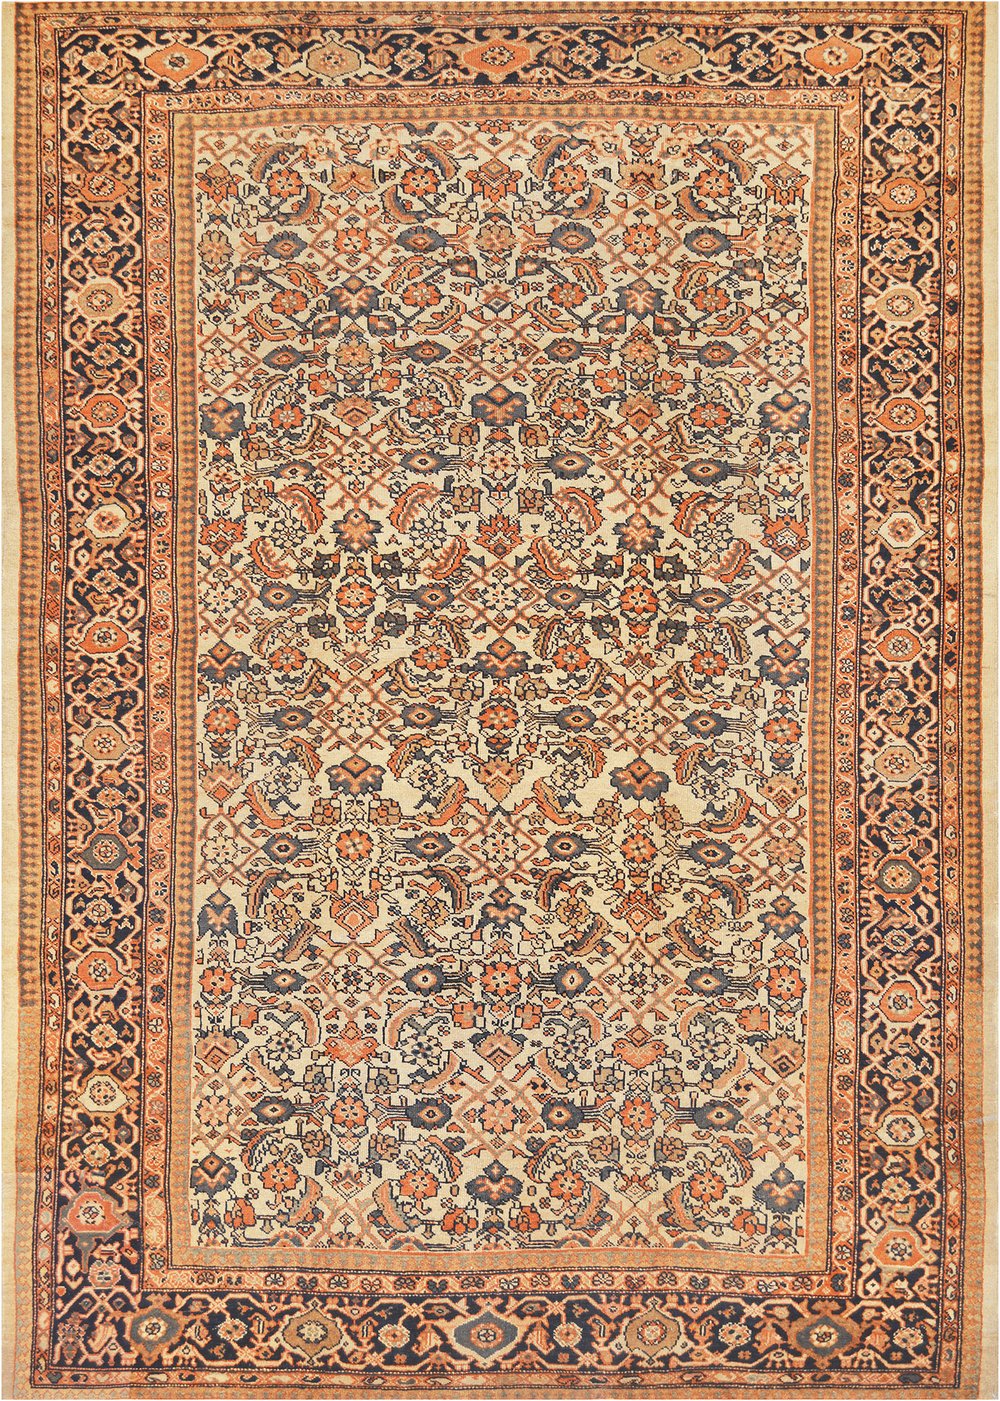 Persian Sultanabad Rug